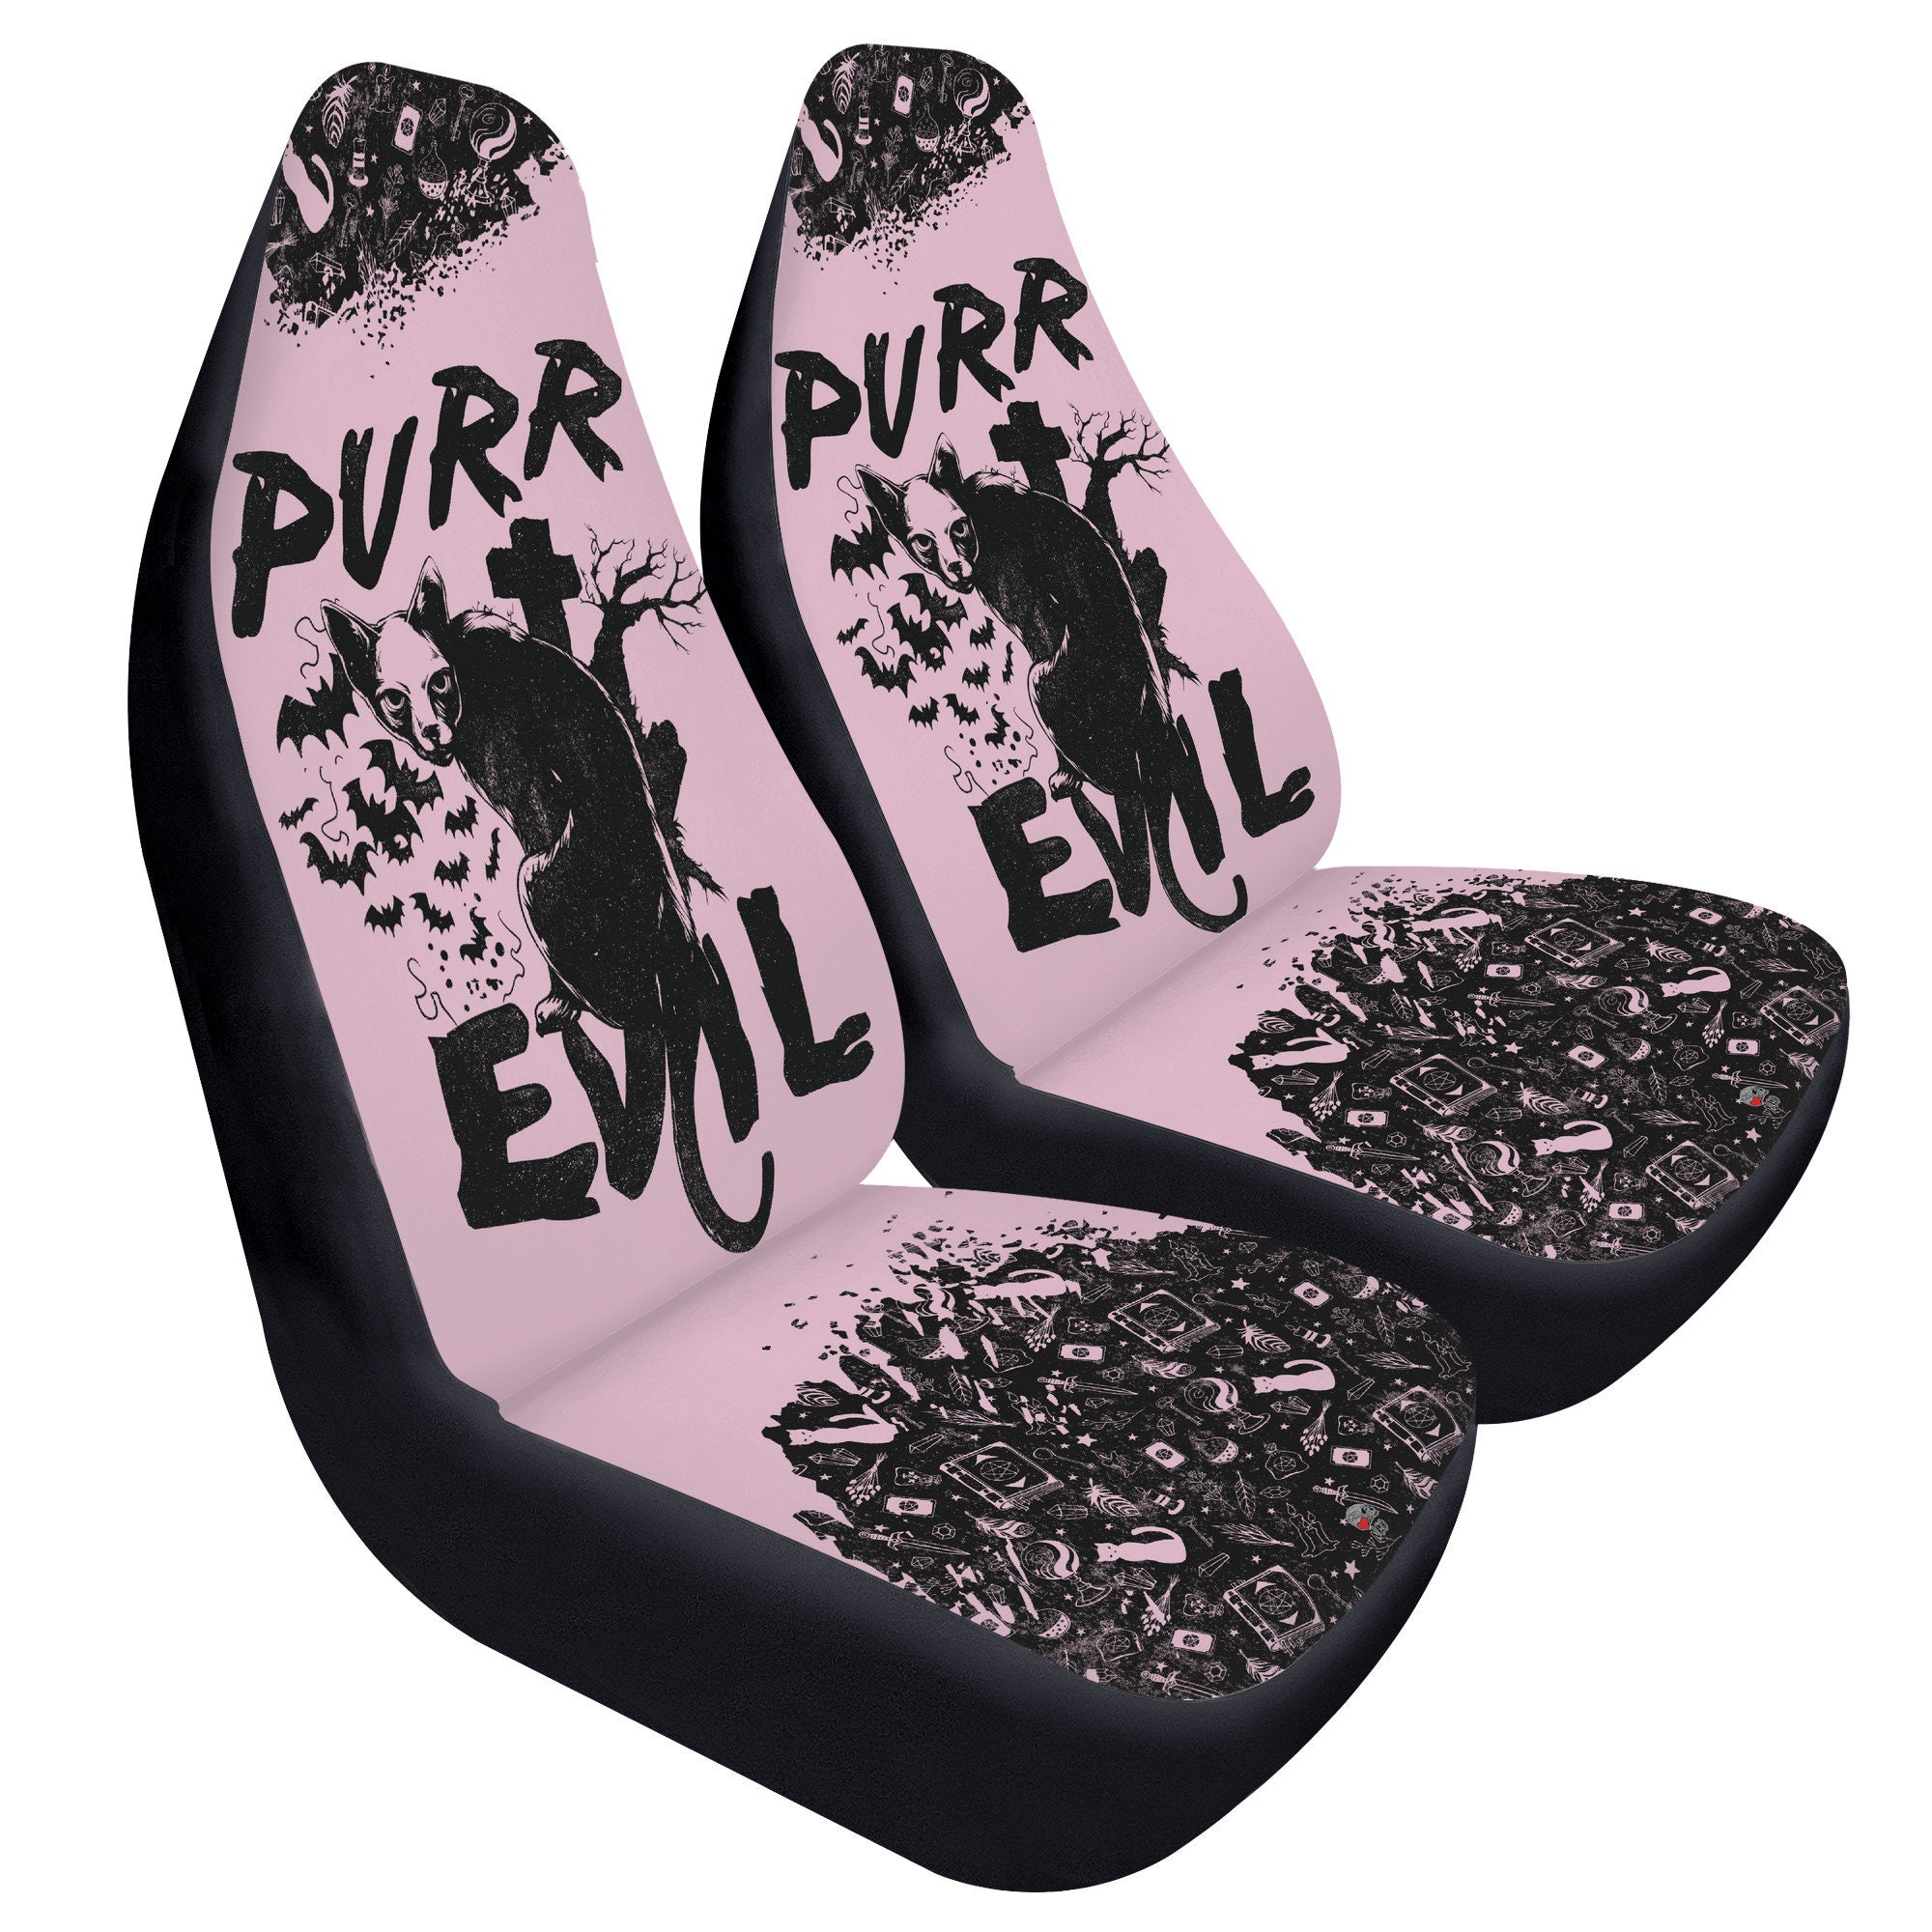 Occult Cat Pastel Goth Car Seats Covers, Grunge Gothic Car Seats Protector,  Halloween Vamp Car Accessories, Magic Signs Witchy Halloween -  UK